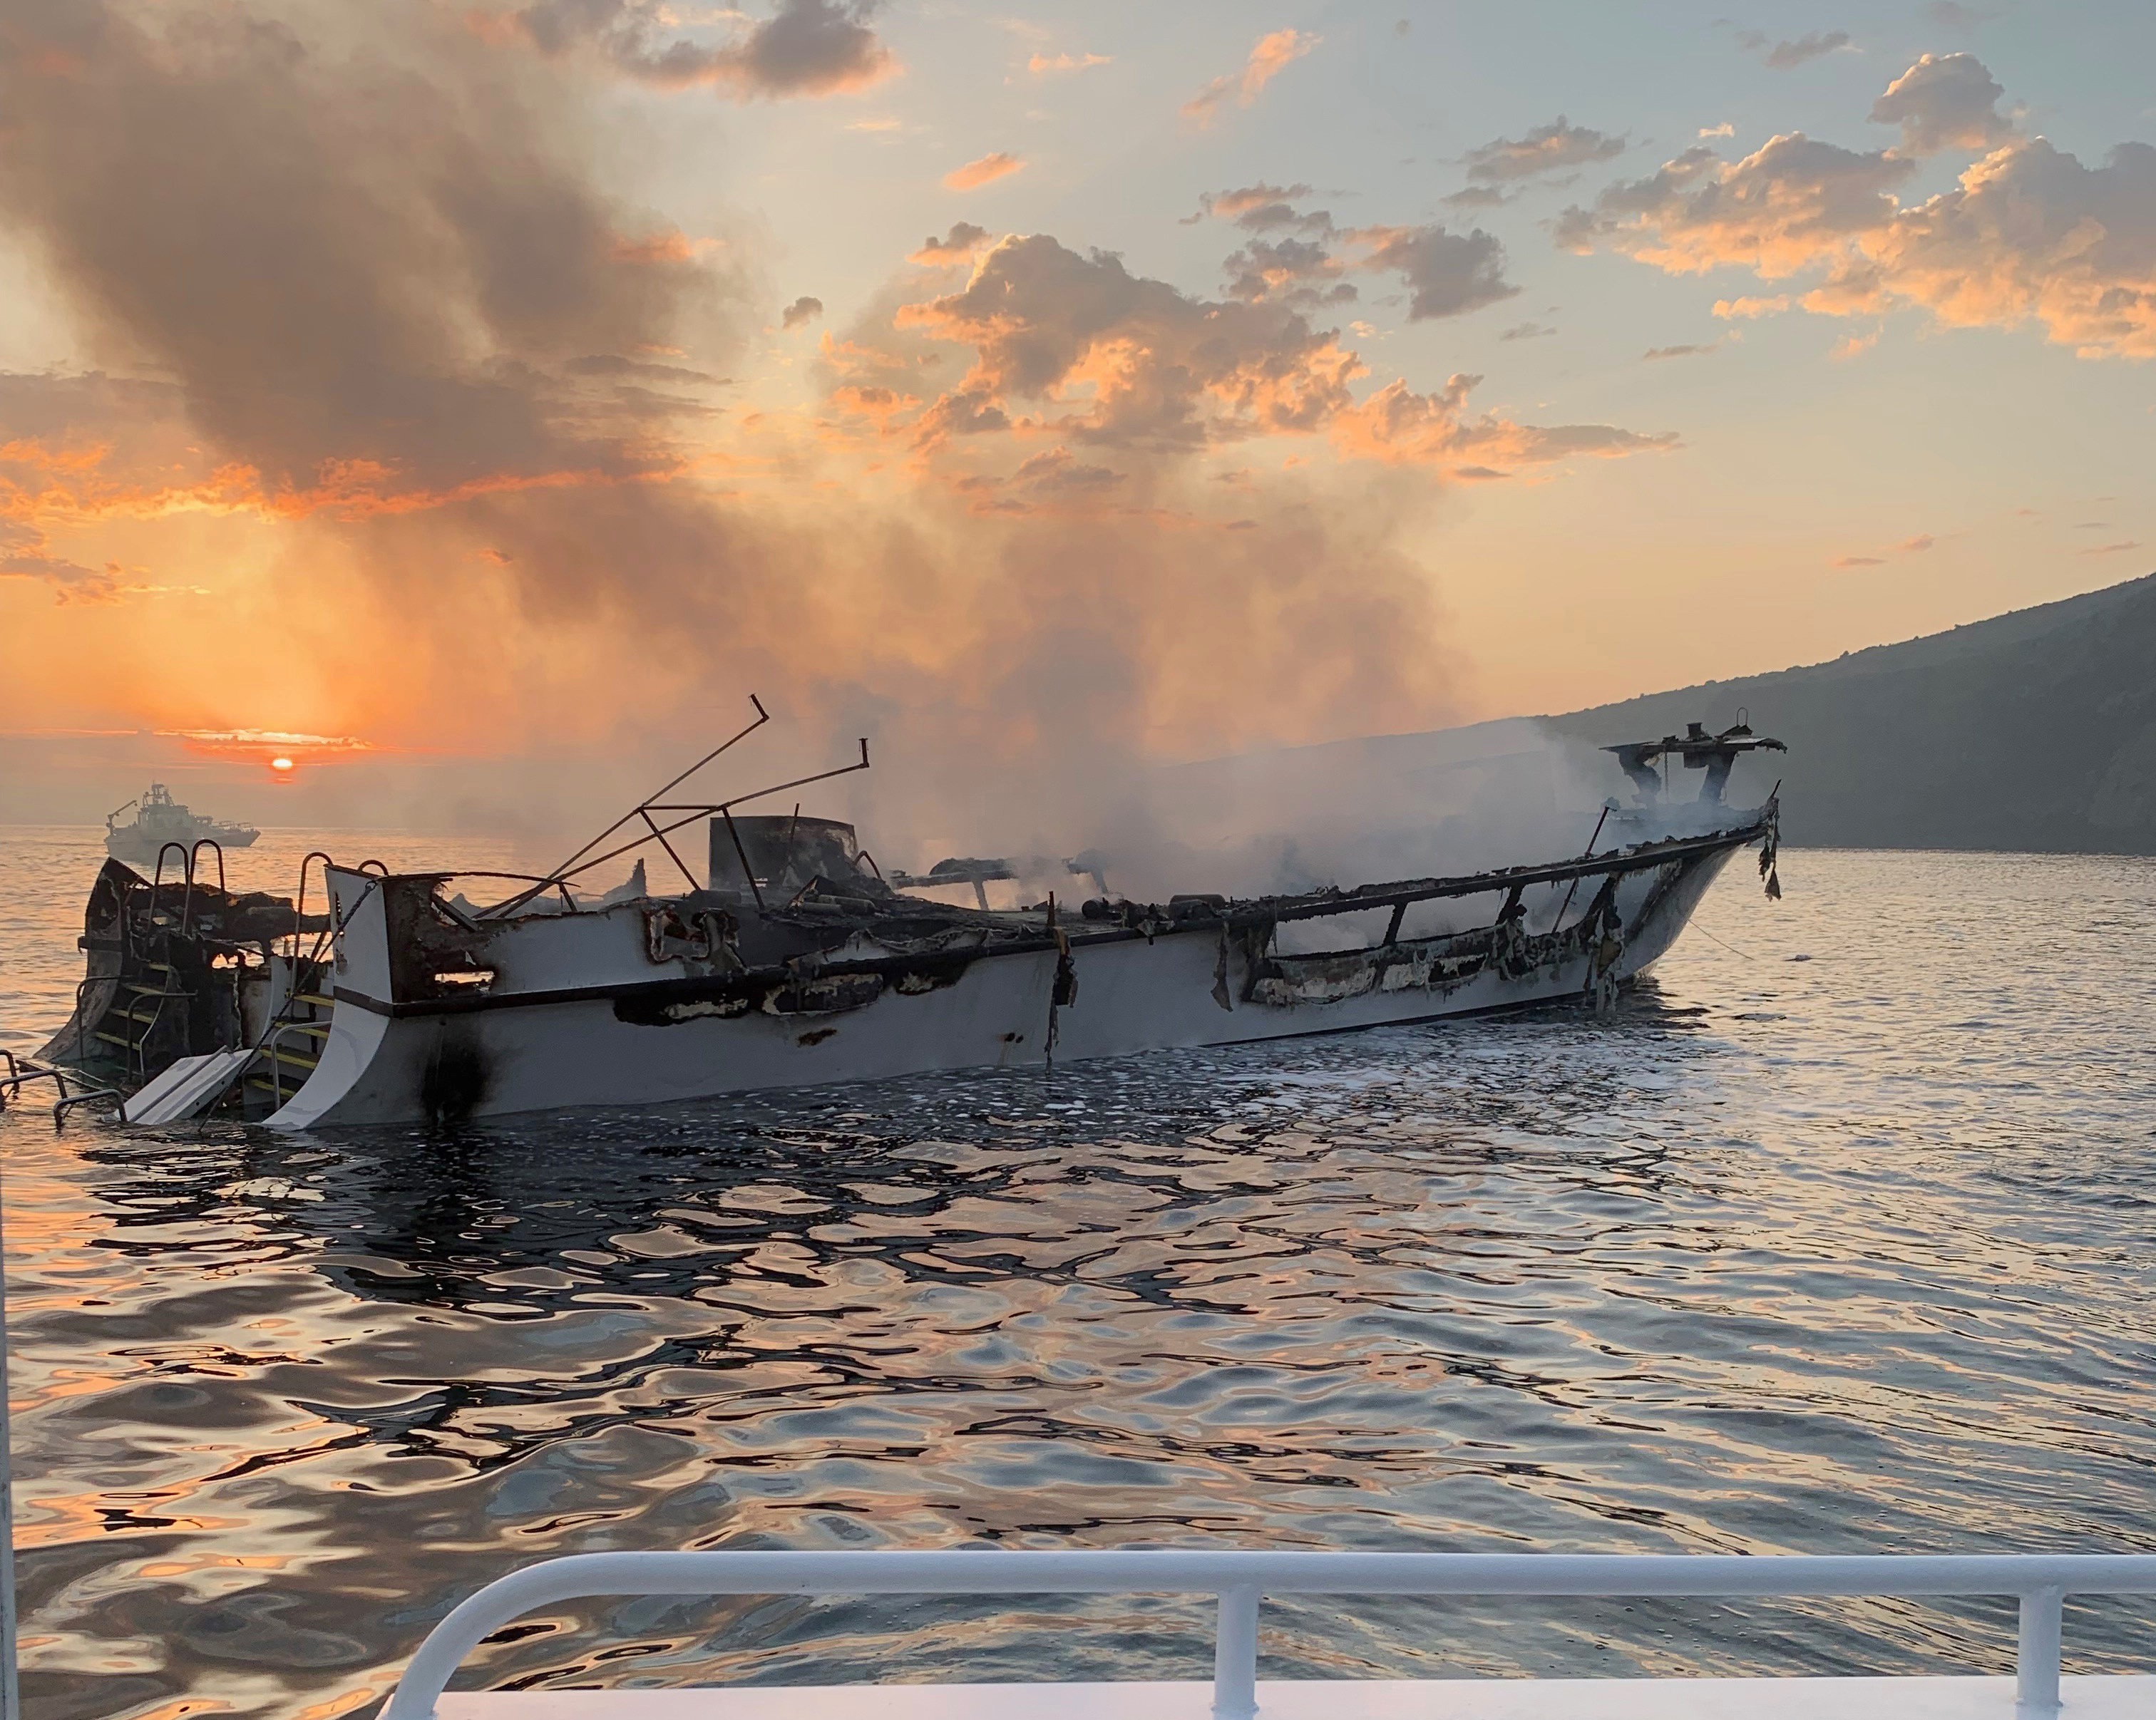 California boat fire: A Labor Day weekend diving adventure. Then disaster struck